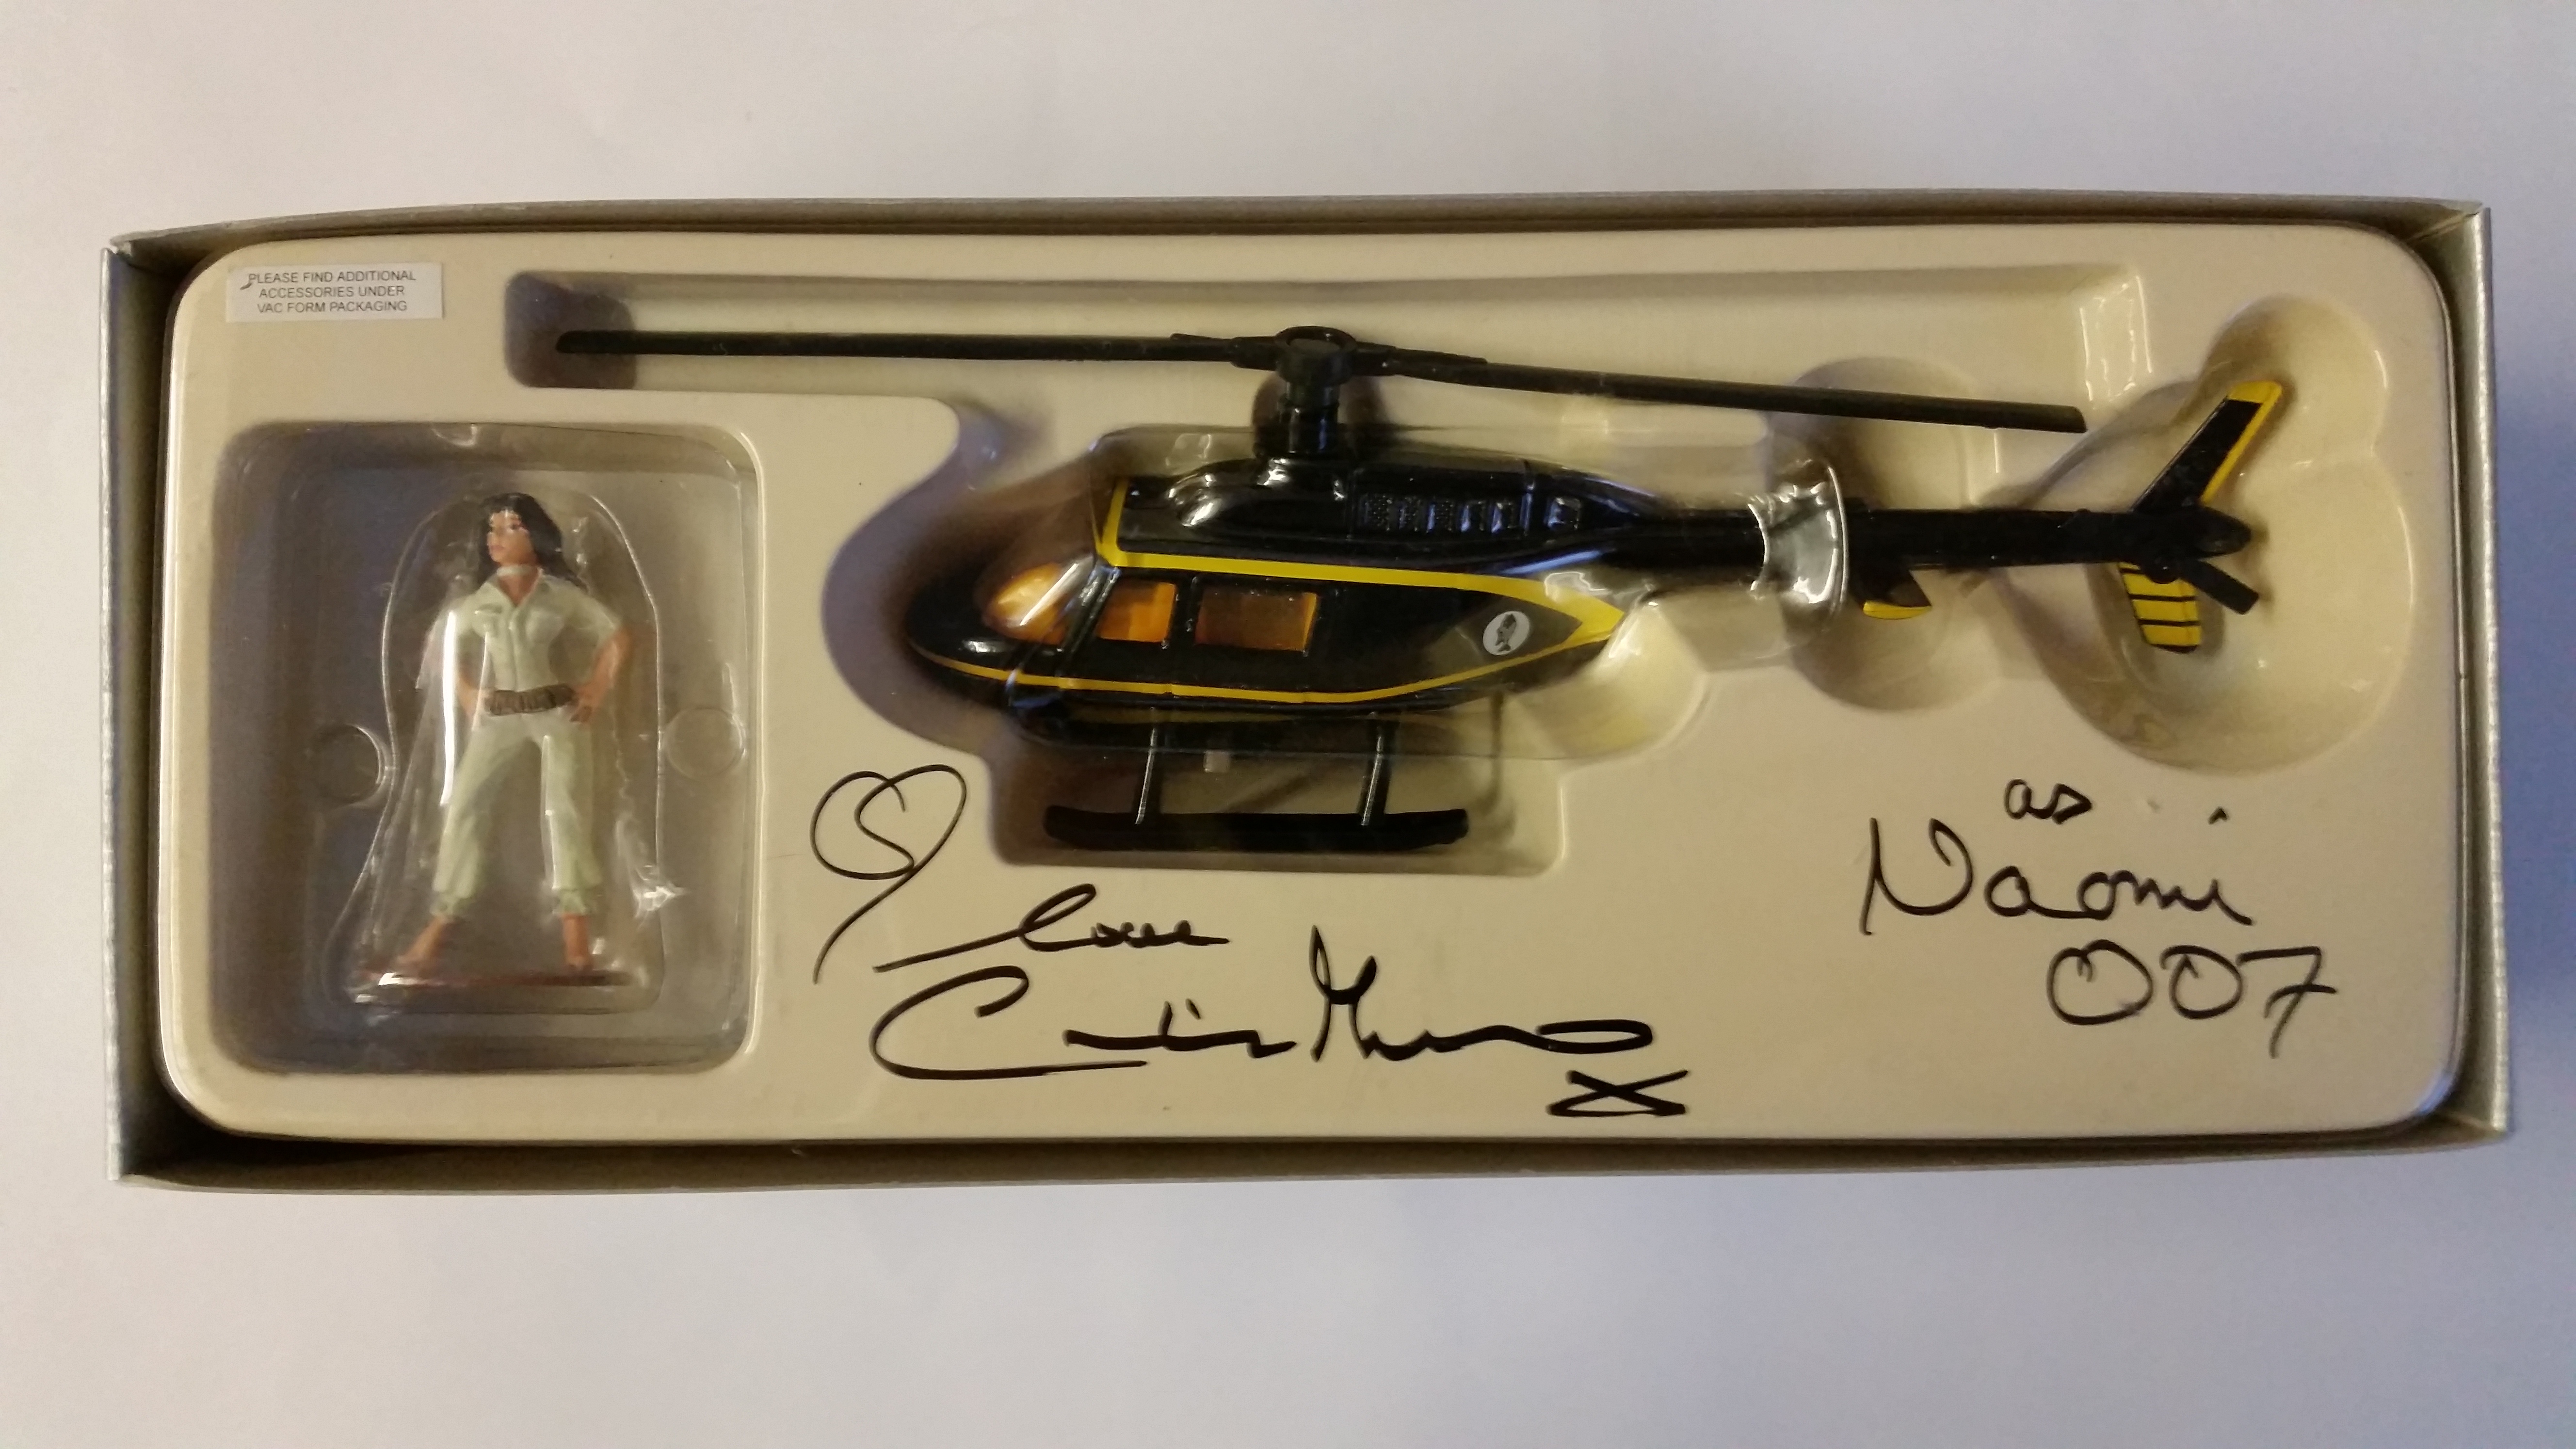 CINEMA, James Bond toy, Stromberg helicopter & Naomi figure, original box internal fitting signed by - Image 2 of 2